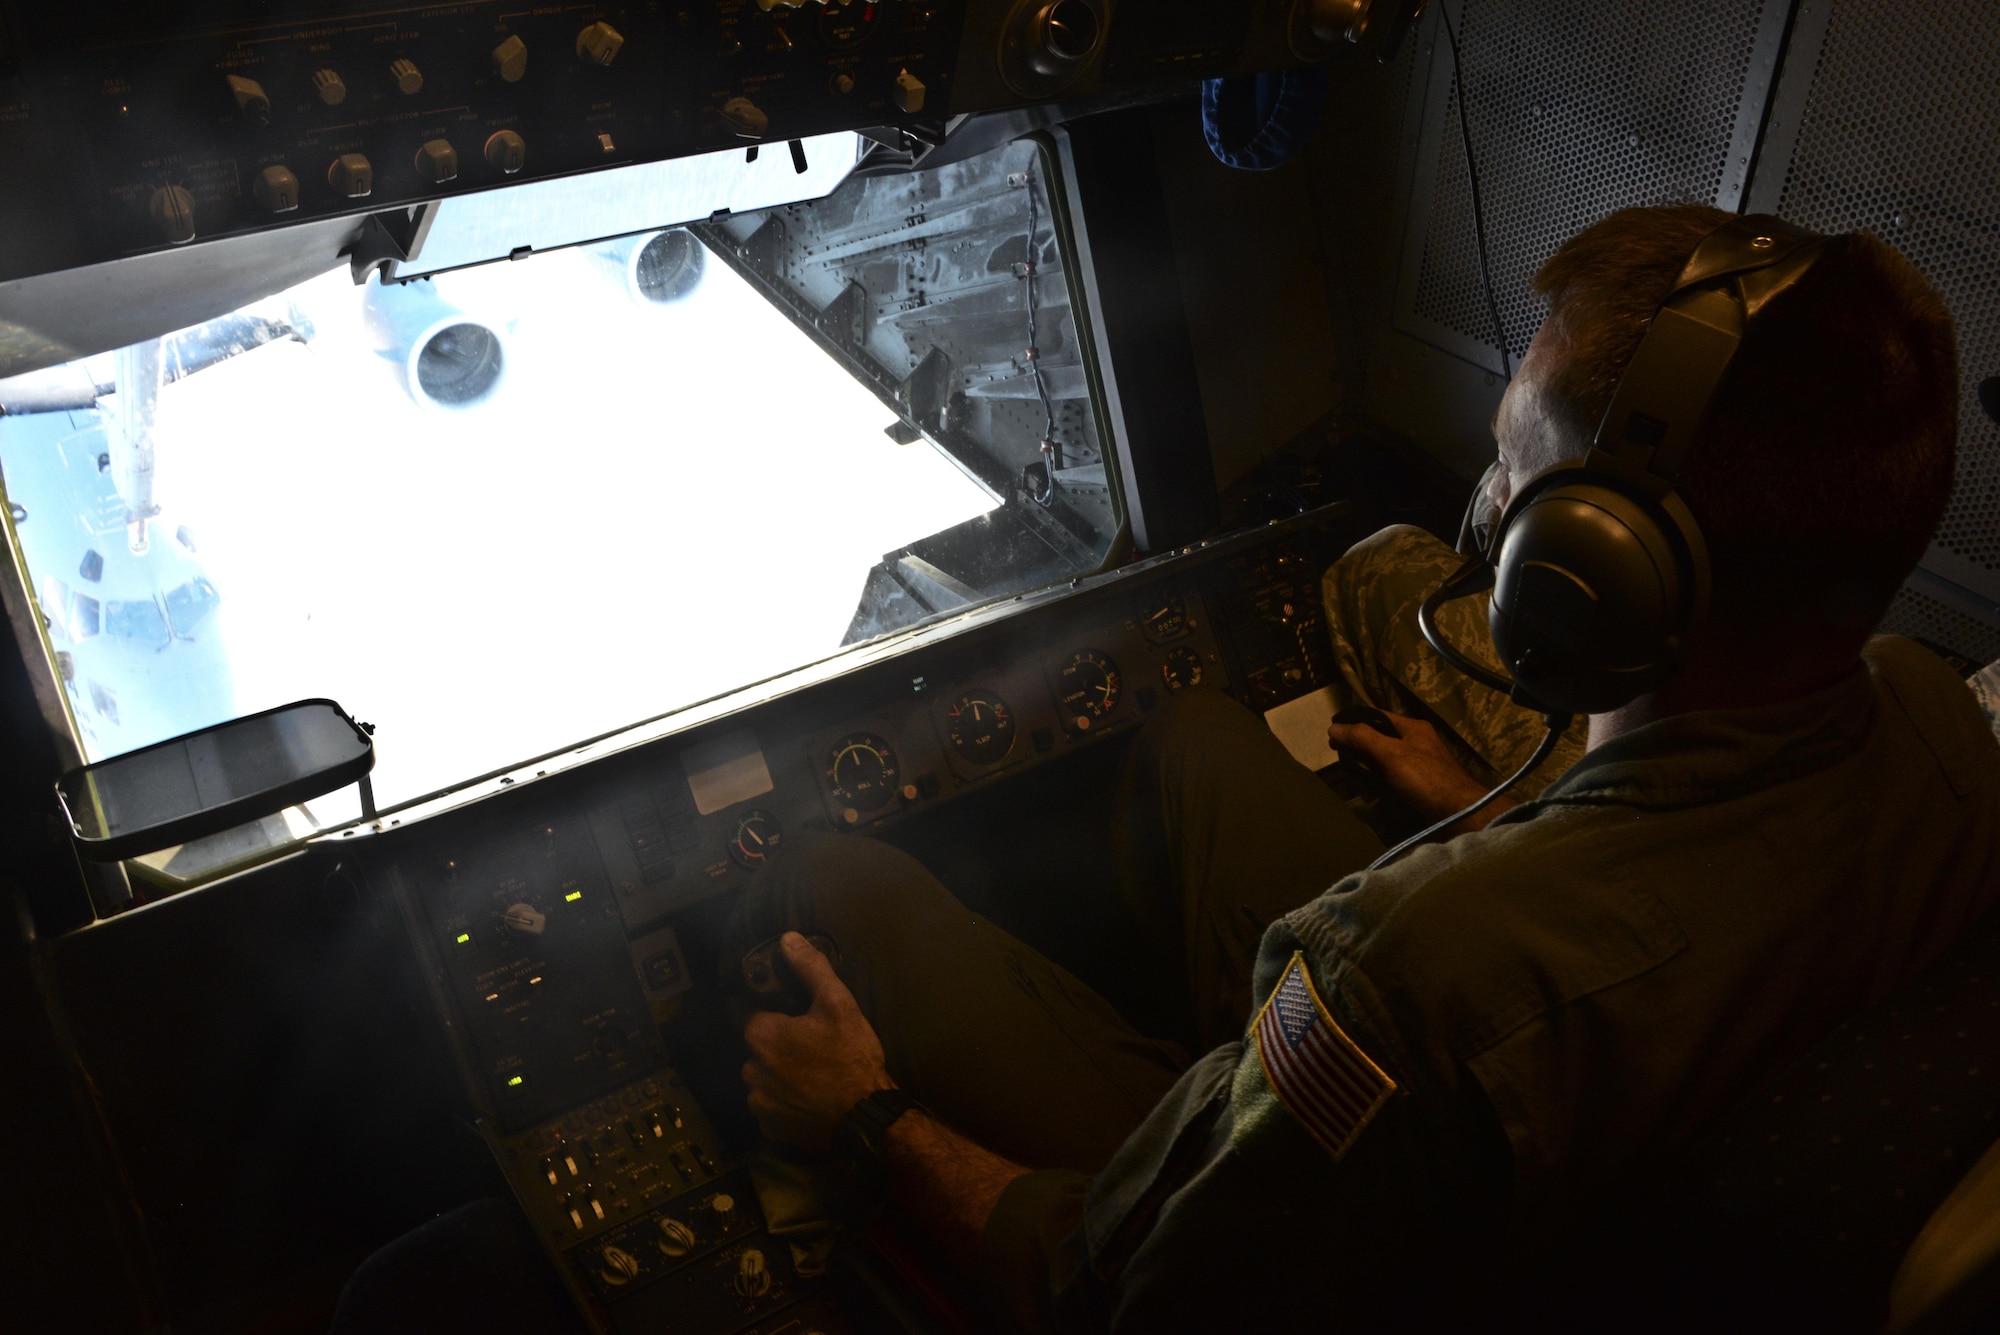 U.S. Air Force Tech. Sgt. Daniel Flenniken, 6th Air Refueling Squadron boom operator, Travis Air Force Base, California, refuels a C-17 Globemaster III over the Pacific Ocean during Exercise Ultimate Reach July 13, 2017. During the operation, three KC-10s from Travis AFB and Joint Base McGuire-Dix-Lakehurst, New Jersey, refueled five C-17s carrying more than 300 coalition paratroopers. The C-17s went on to conduct a strategic air drop over Australia in support of Exercise Talisman Saber 2017. (U.S. Air Force photo by 2nd Lt. Sarah Johnson)